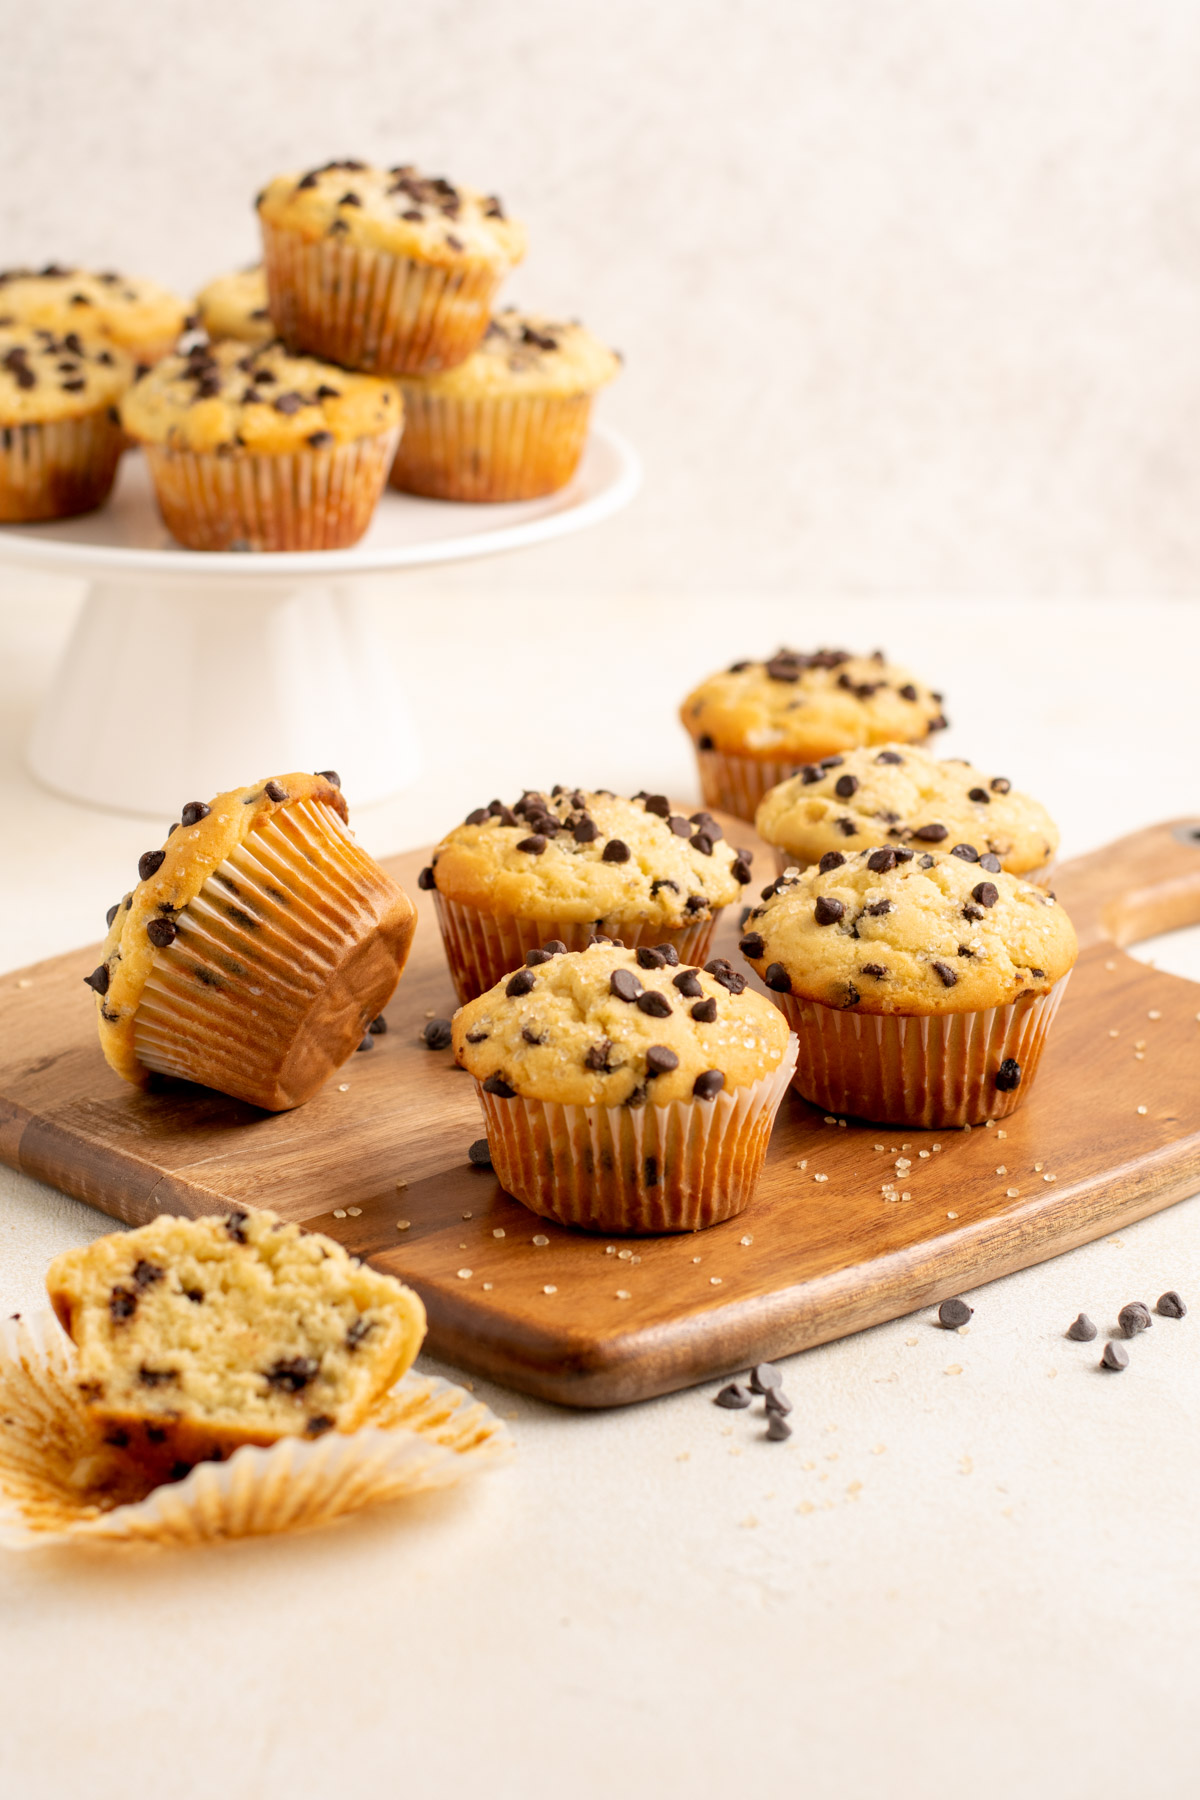 chocolate chip muffins on a wood board, some behind on a white pedestal.